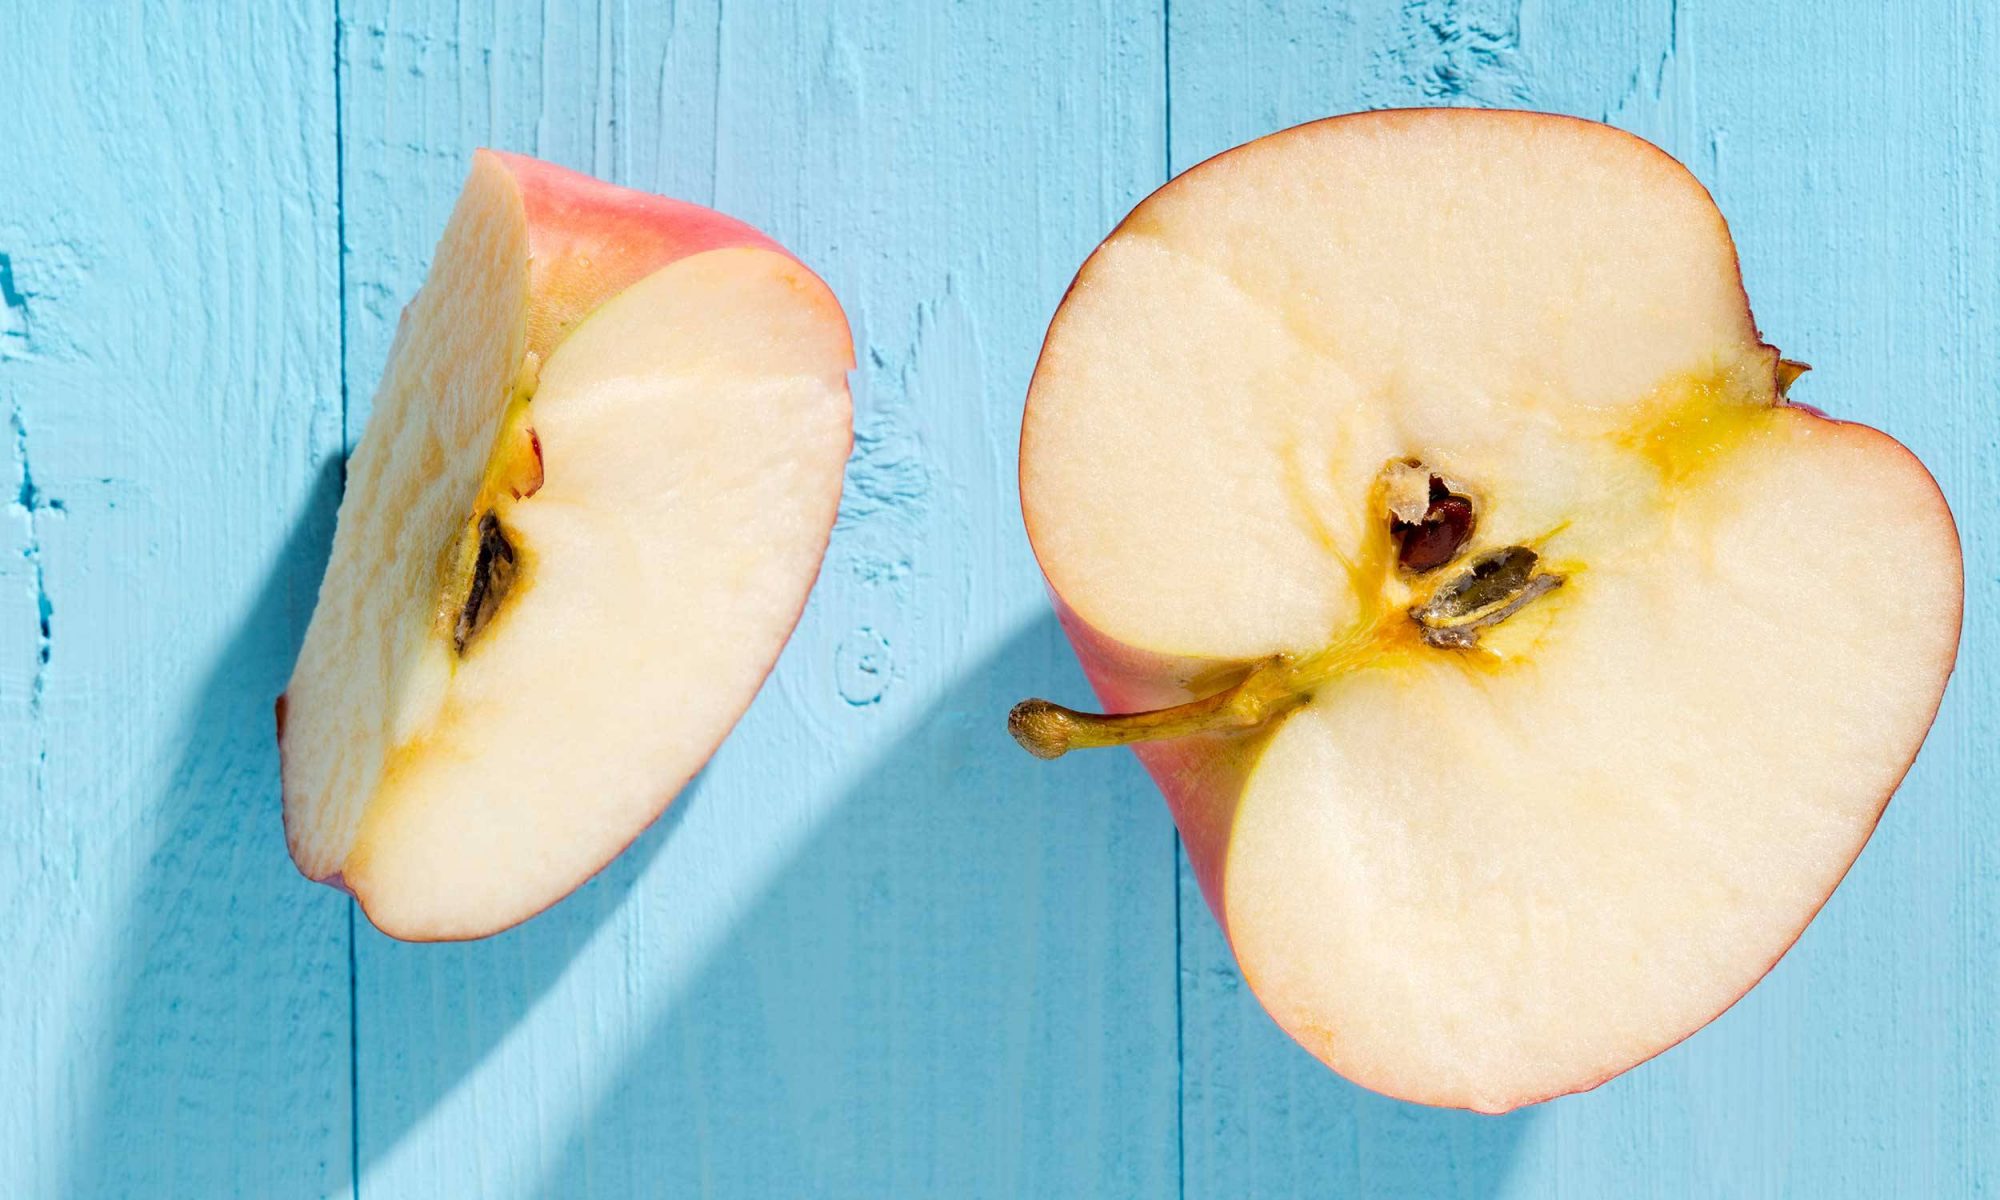 How to Keep Apples From Turning Brown (6 Easy Methods)